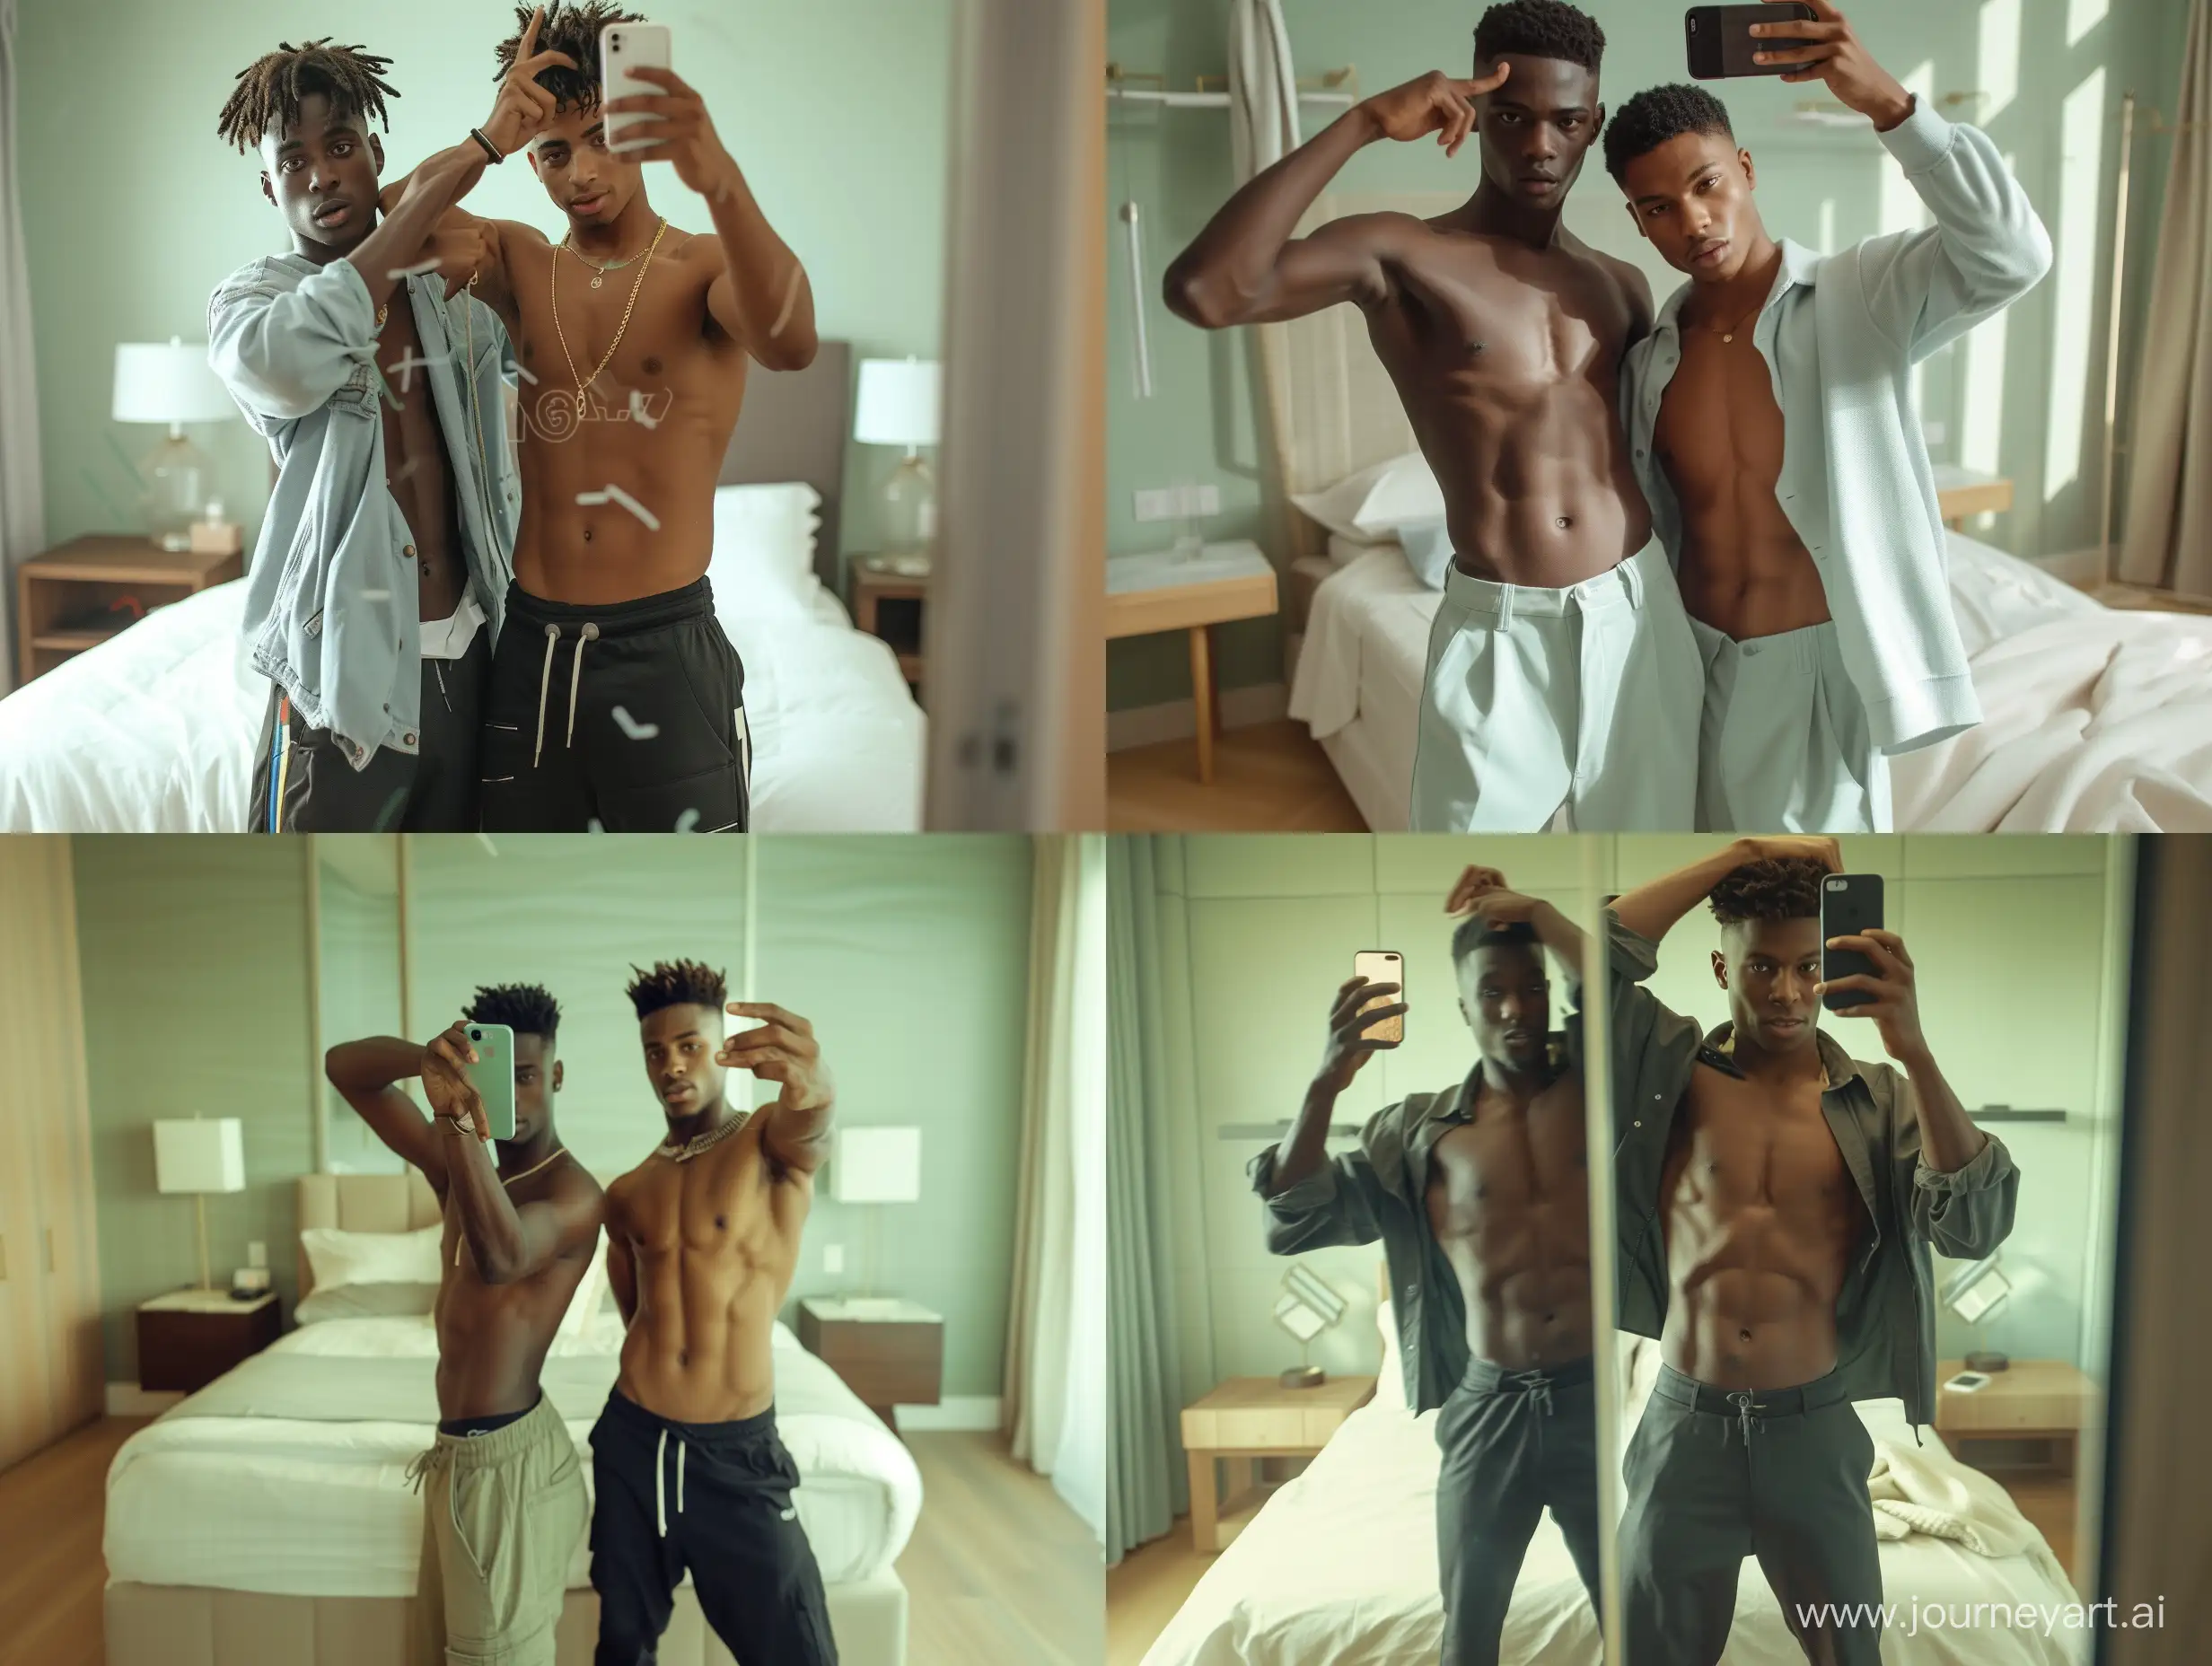 Two young men in modern streetwear, one African American and one Latino, taking a mirror selfie with an iPhone in a modern bedroom. They are posing by lifting their shirts with one hand to show their abs. The bedroom has light green walls and wood floors, with a bed and nightstand. Taken with a 35mm lens on a DSLR camera, from a close perspective looking up at them posing in a full length mirror.